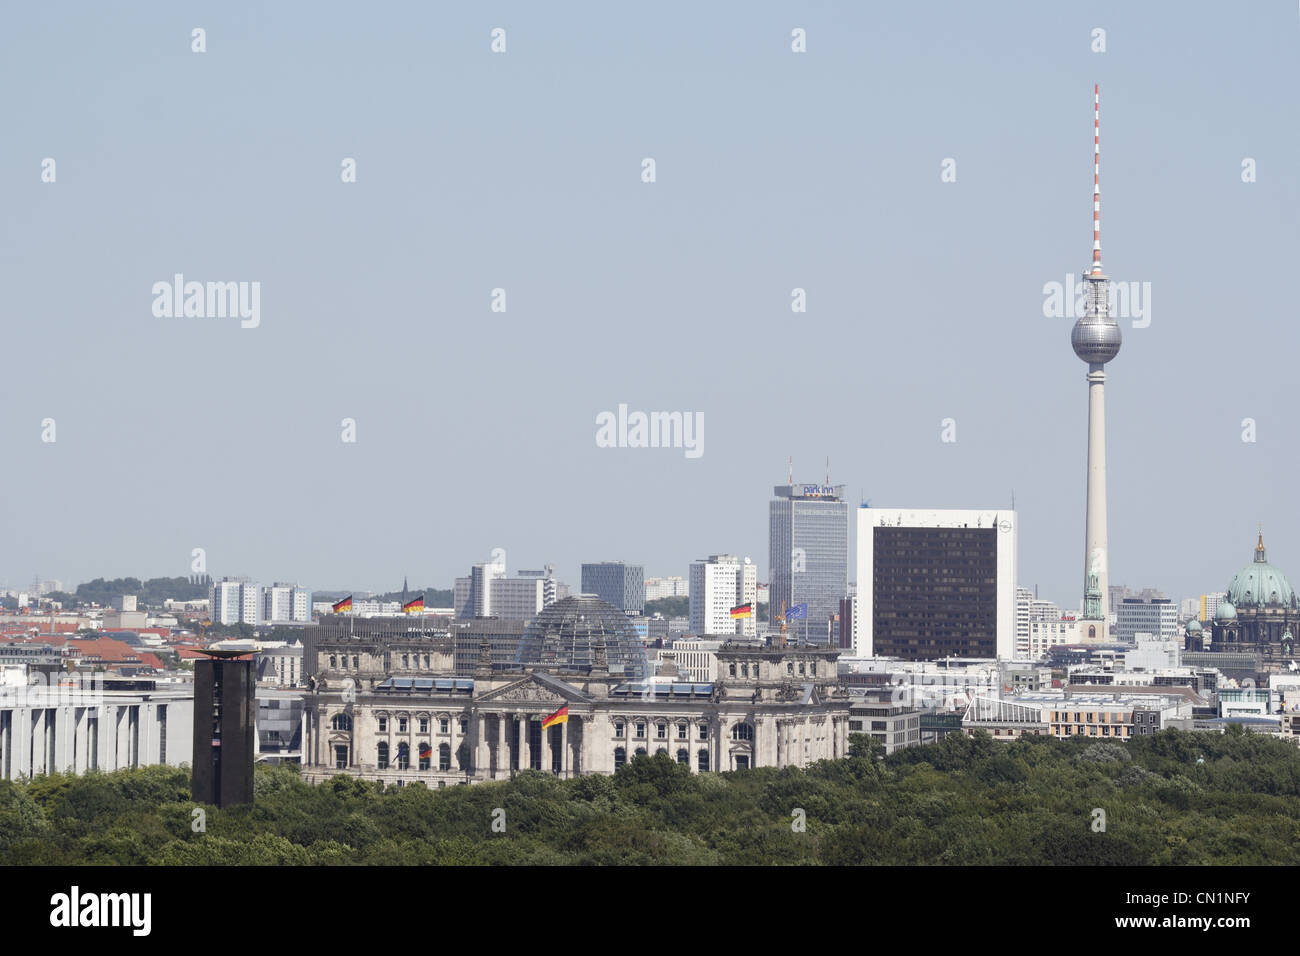 Berlin Mitte Skyline Television Tower Dome Reichstag Stock Photo